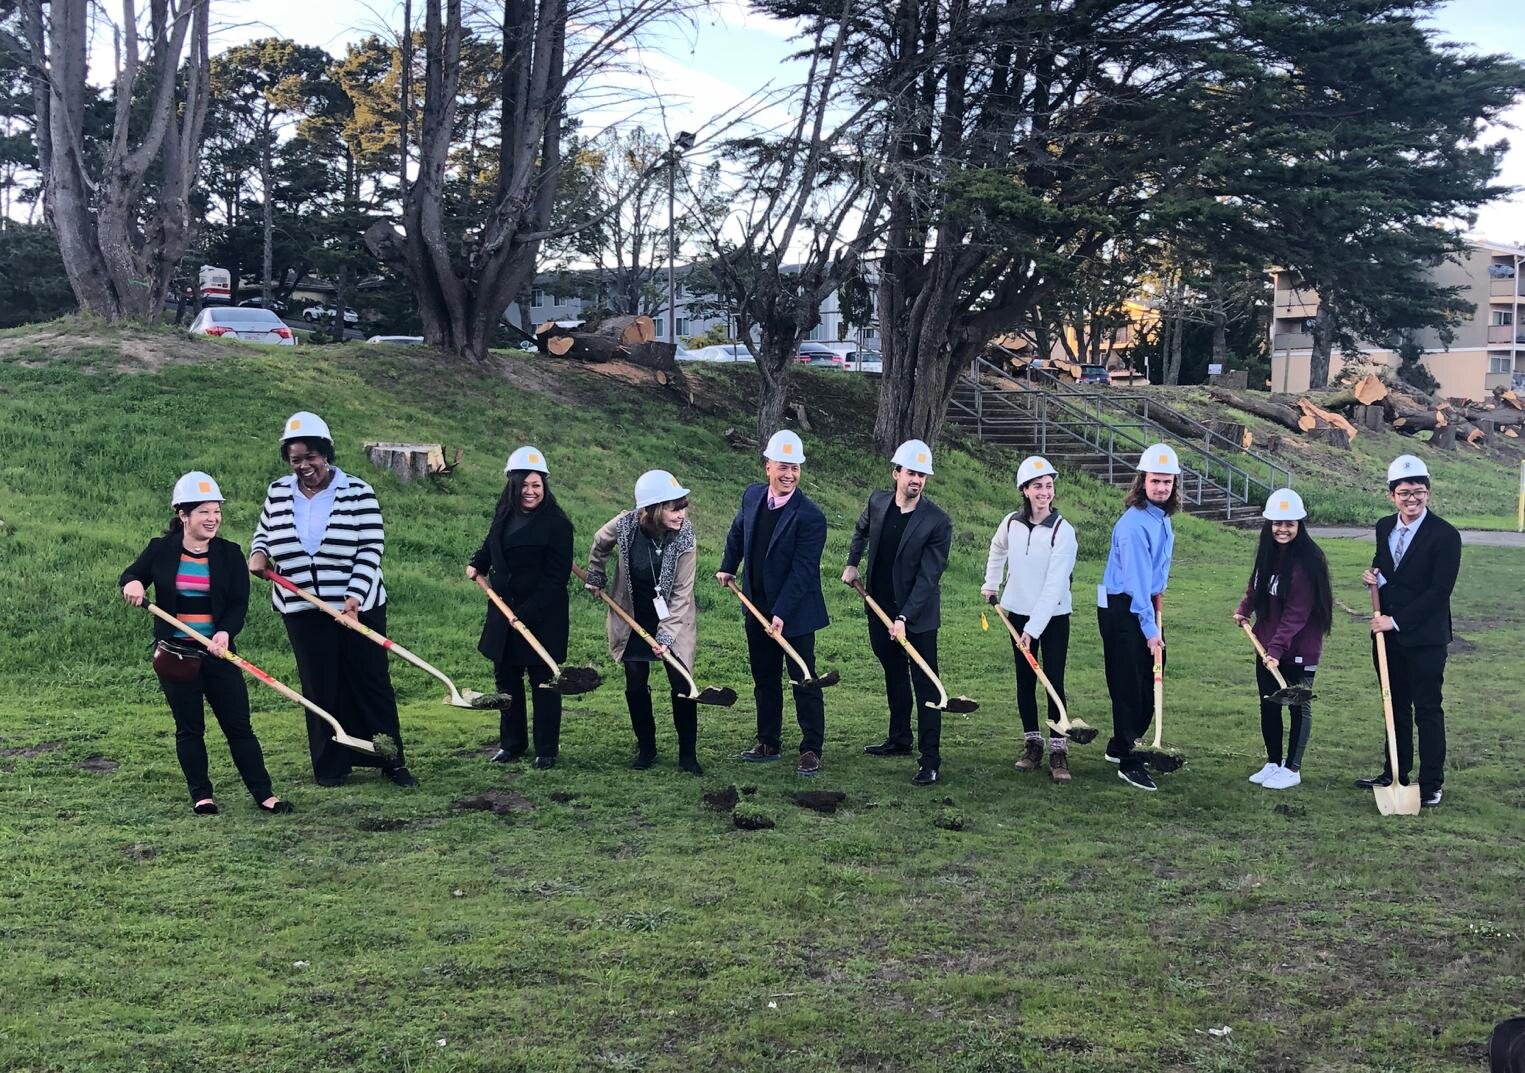 Groundbreaking on Historic Faculty & Staff Housing Project